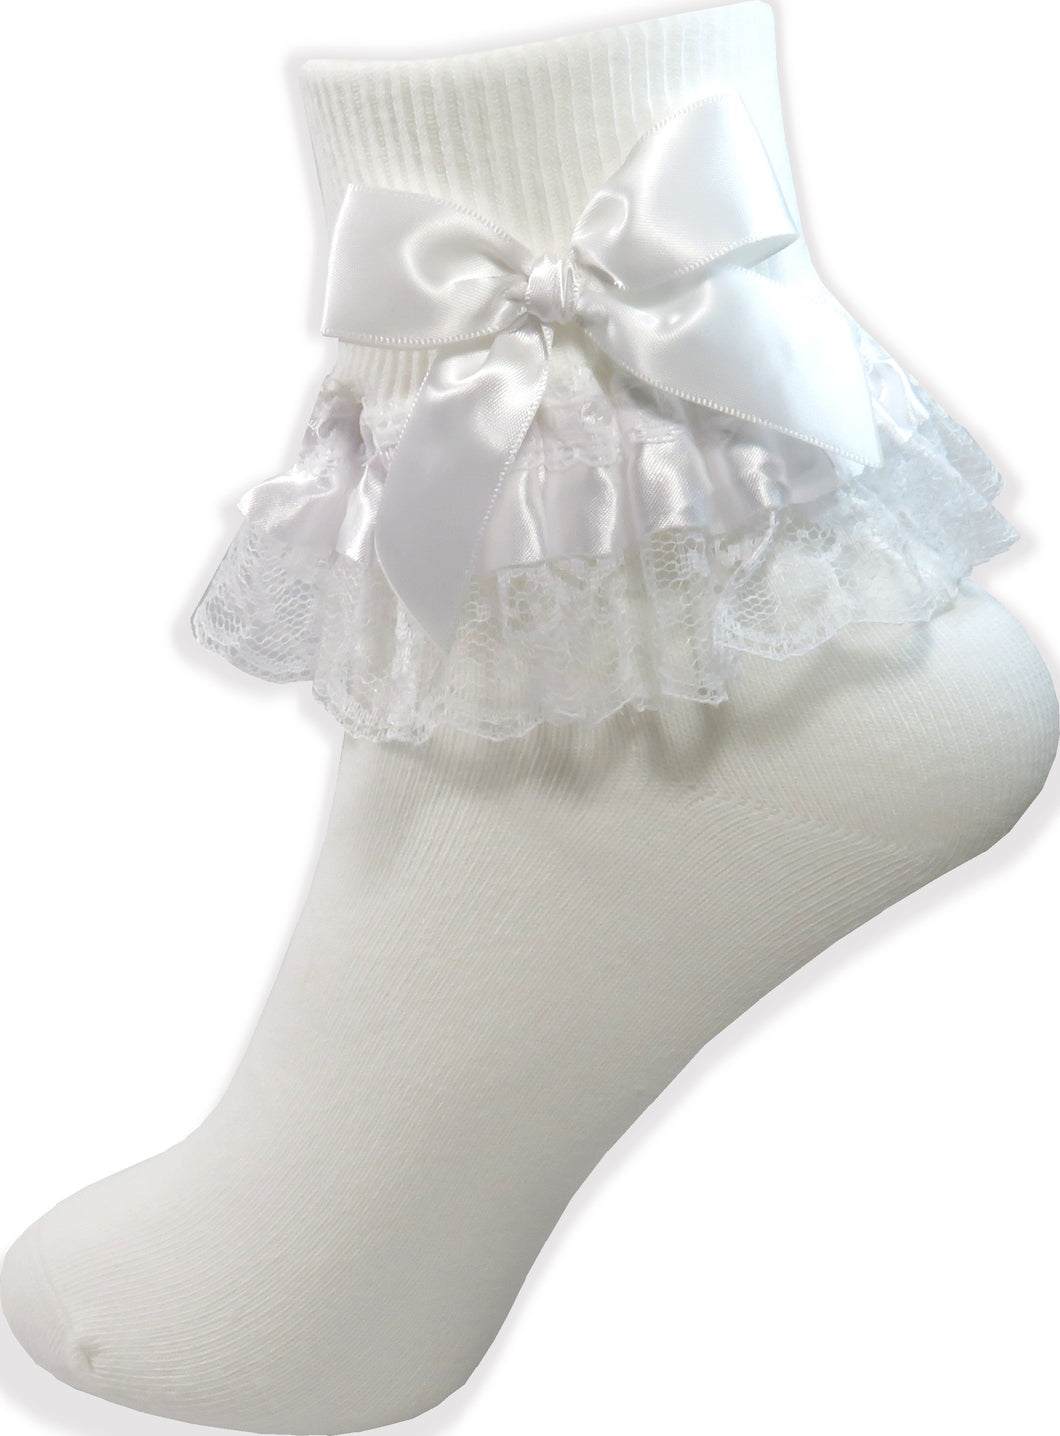 White Lacy Socks with Ribbon & Bows for Adult Sissy Little Girl Leanne's